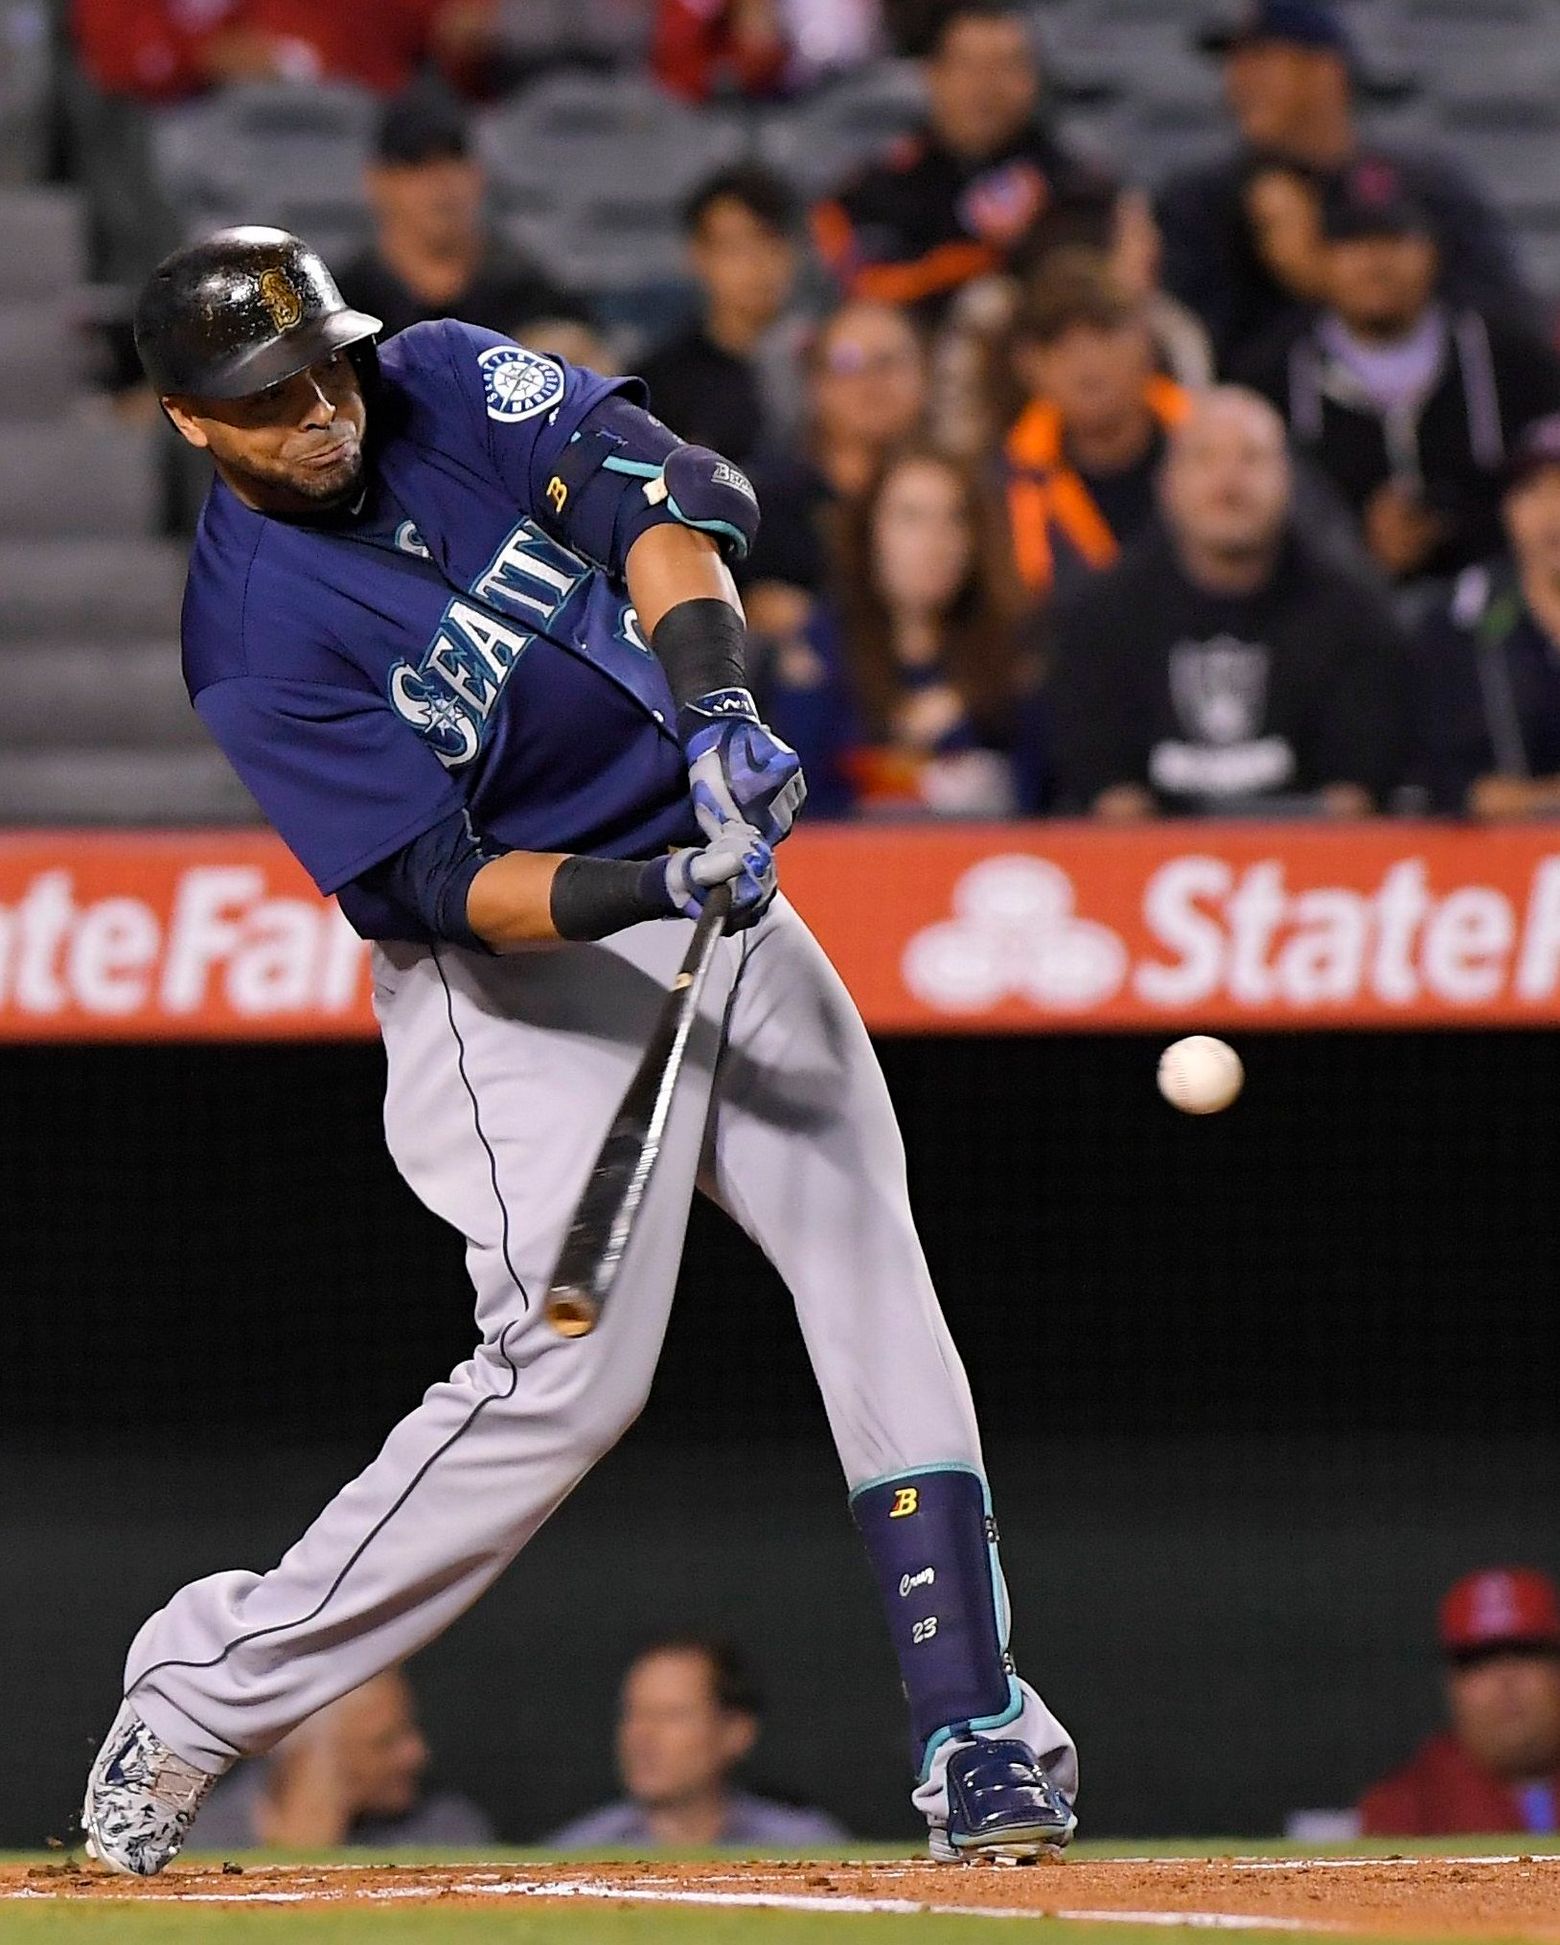 Mariners players, coaches ramp up campaign for Eugenio Suarez to